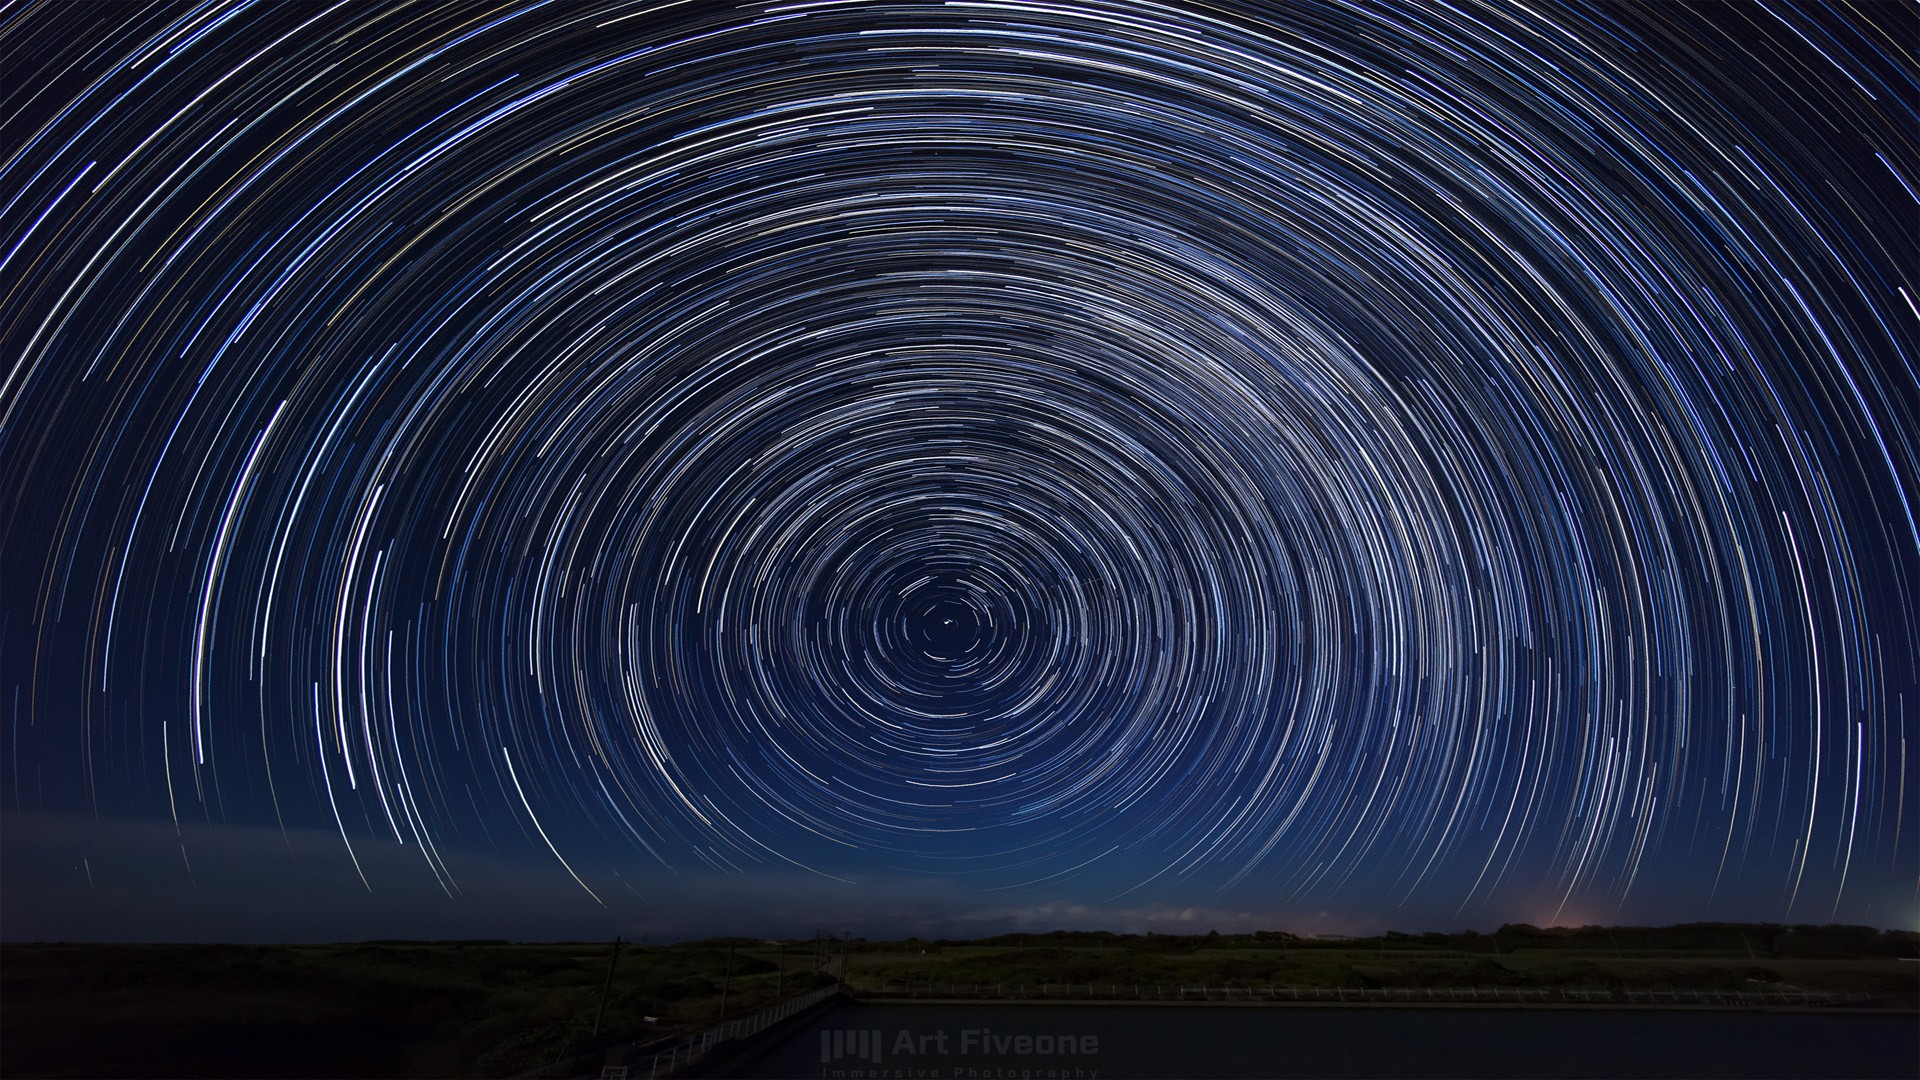 General 1920x1080 long exposure night landscape sky star trails watermarked outdoors